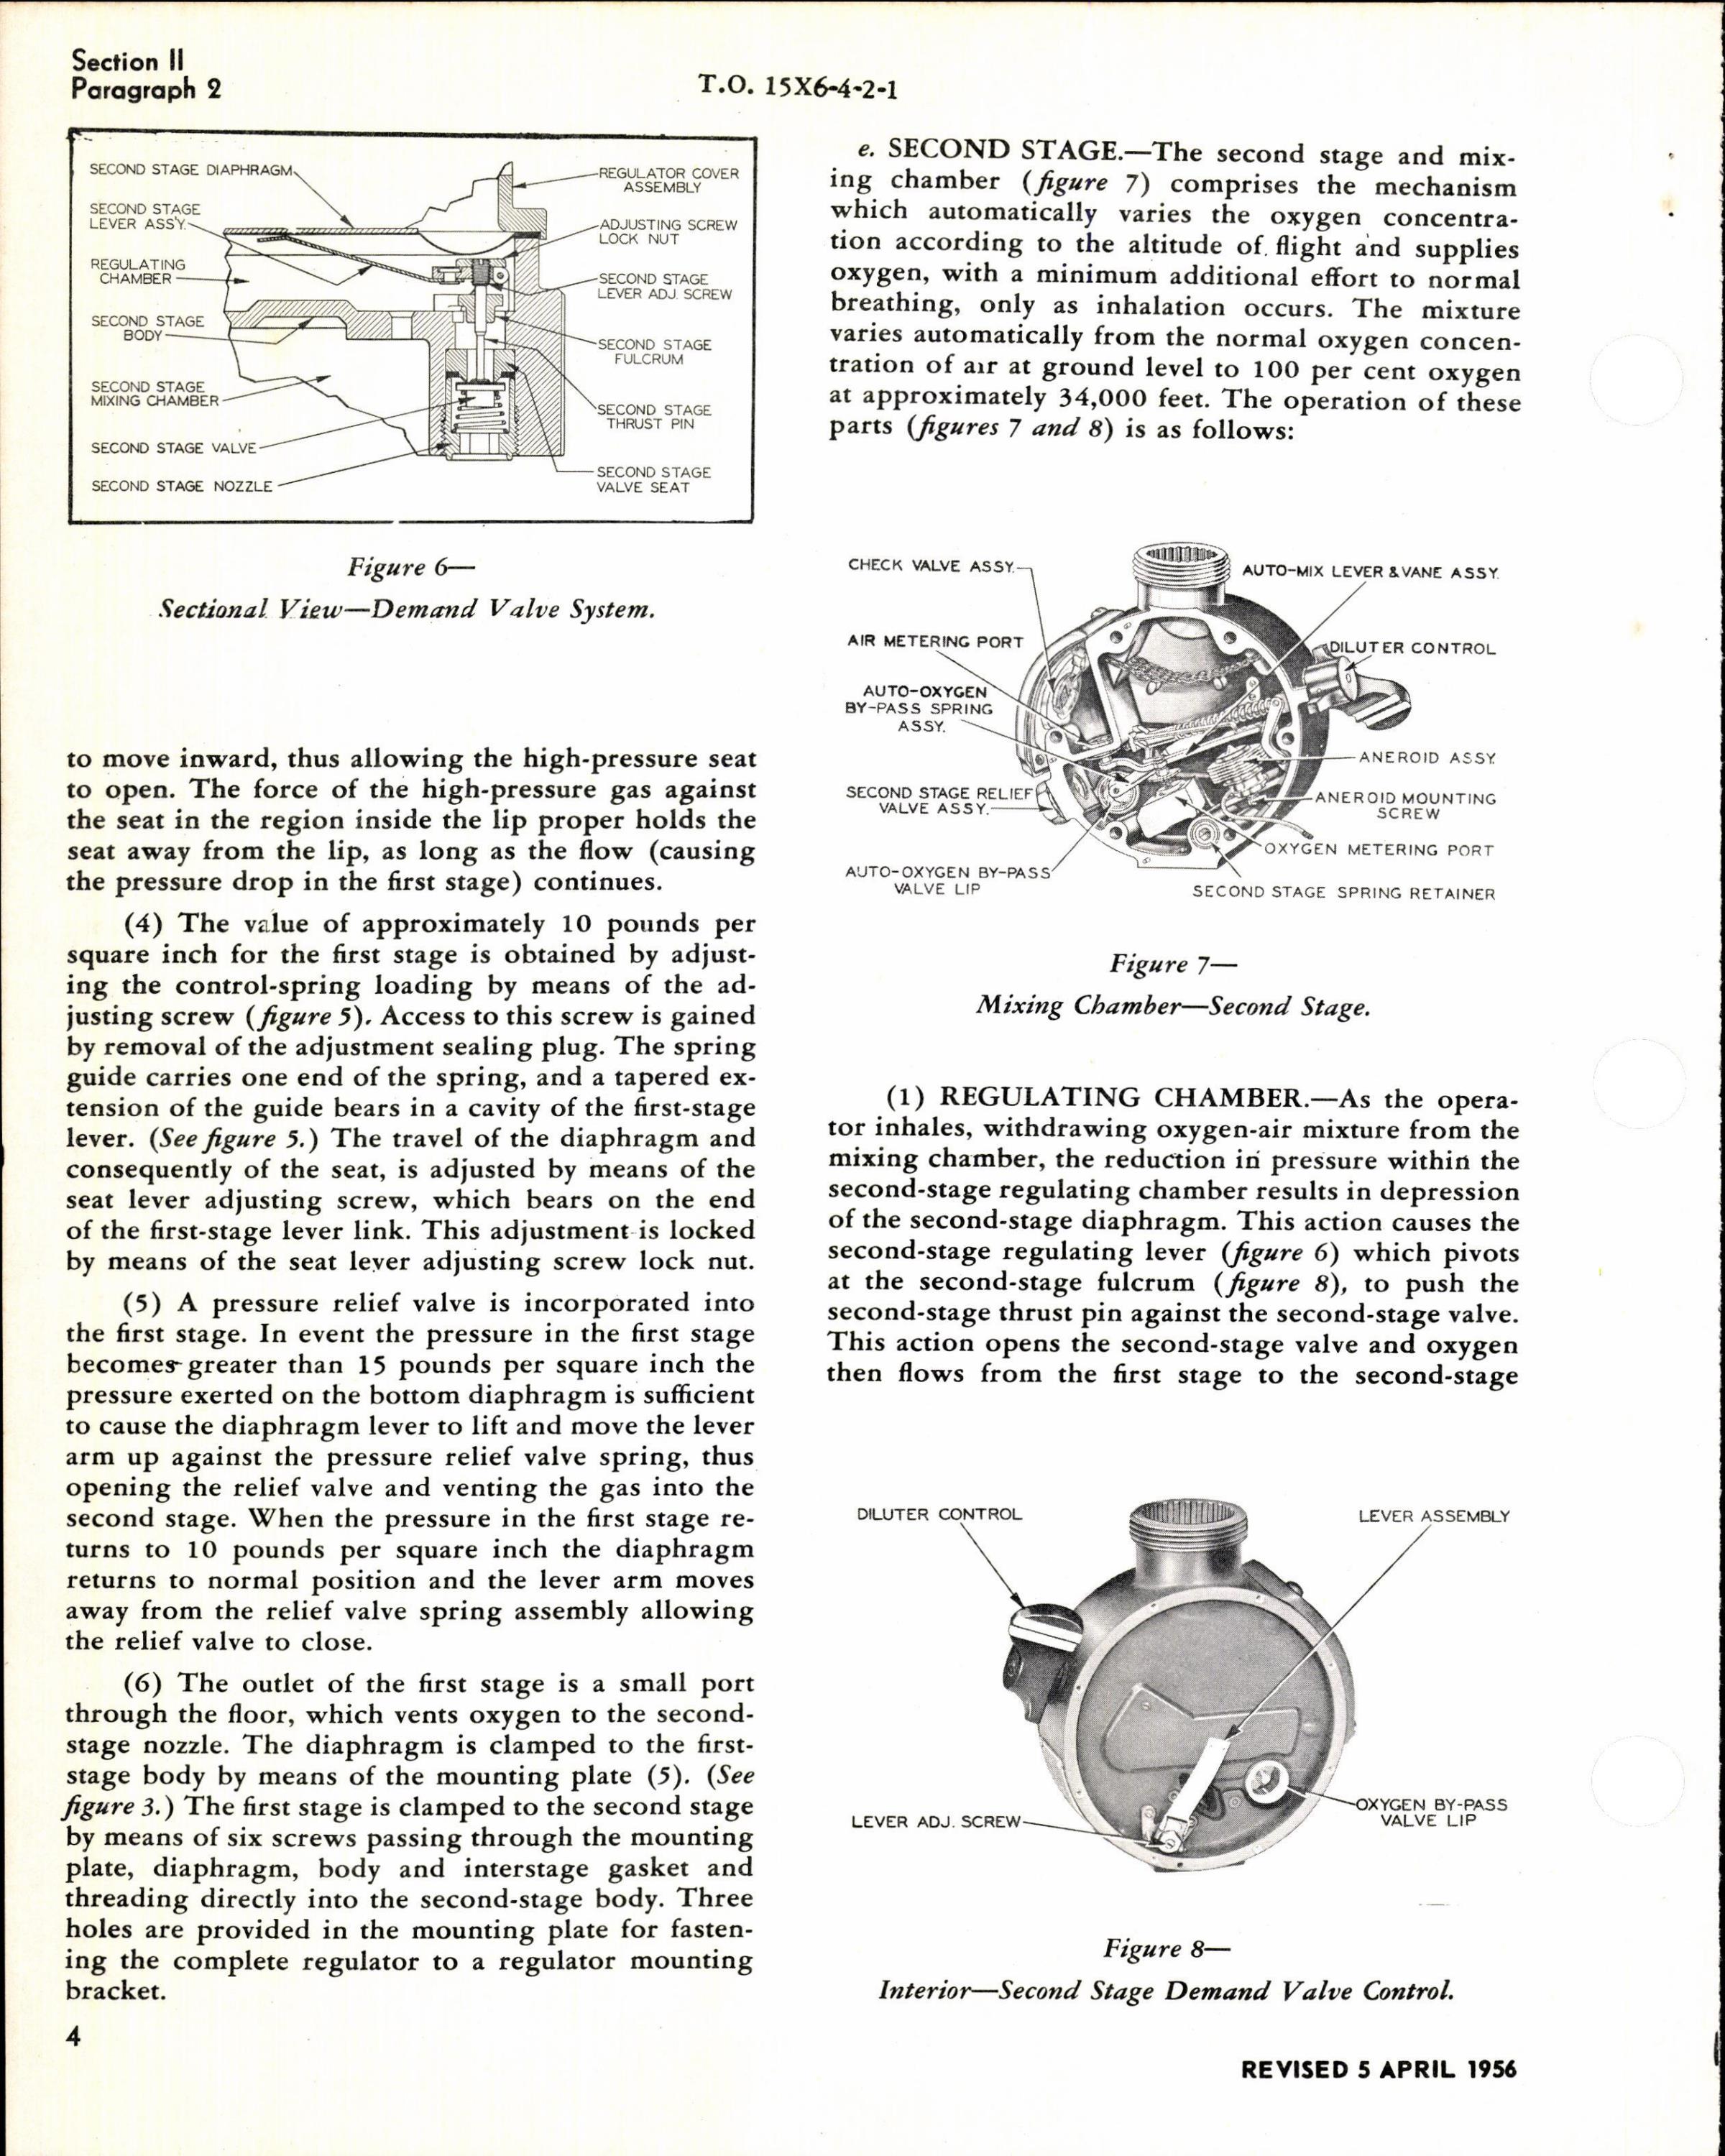 Sample page 4 from AirCorps Library document: Operation, Service, & Overhaul Instructions with Parts Catalog for Type A-14 Pressure Breathing Diluter Demand Oxygen Regulator